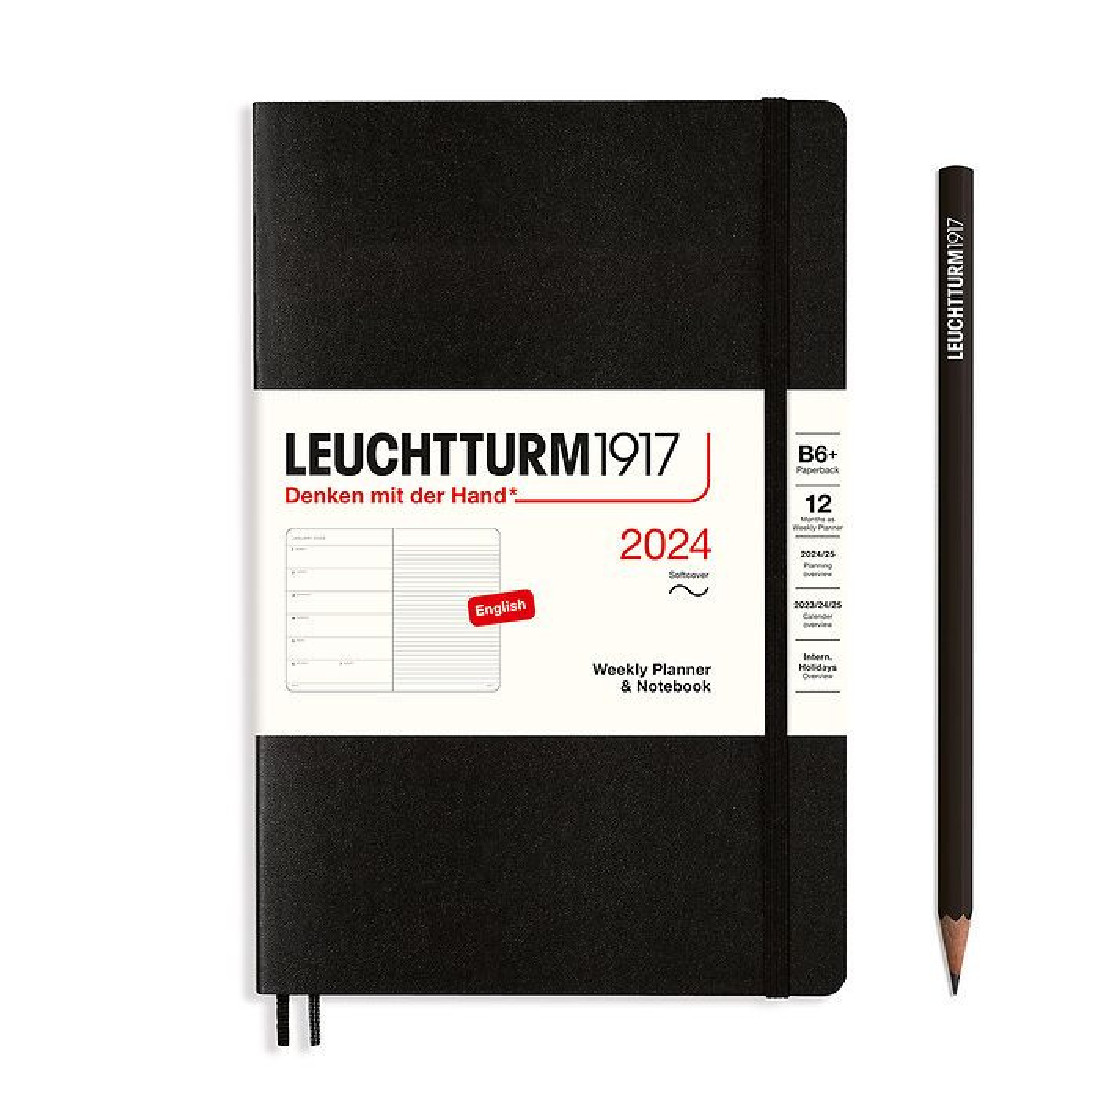 Leuchtturm 1917 Weekly Planner and Notebook 2024 Black Paperback B6 Plus Soft Cover